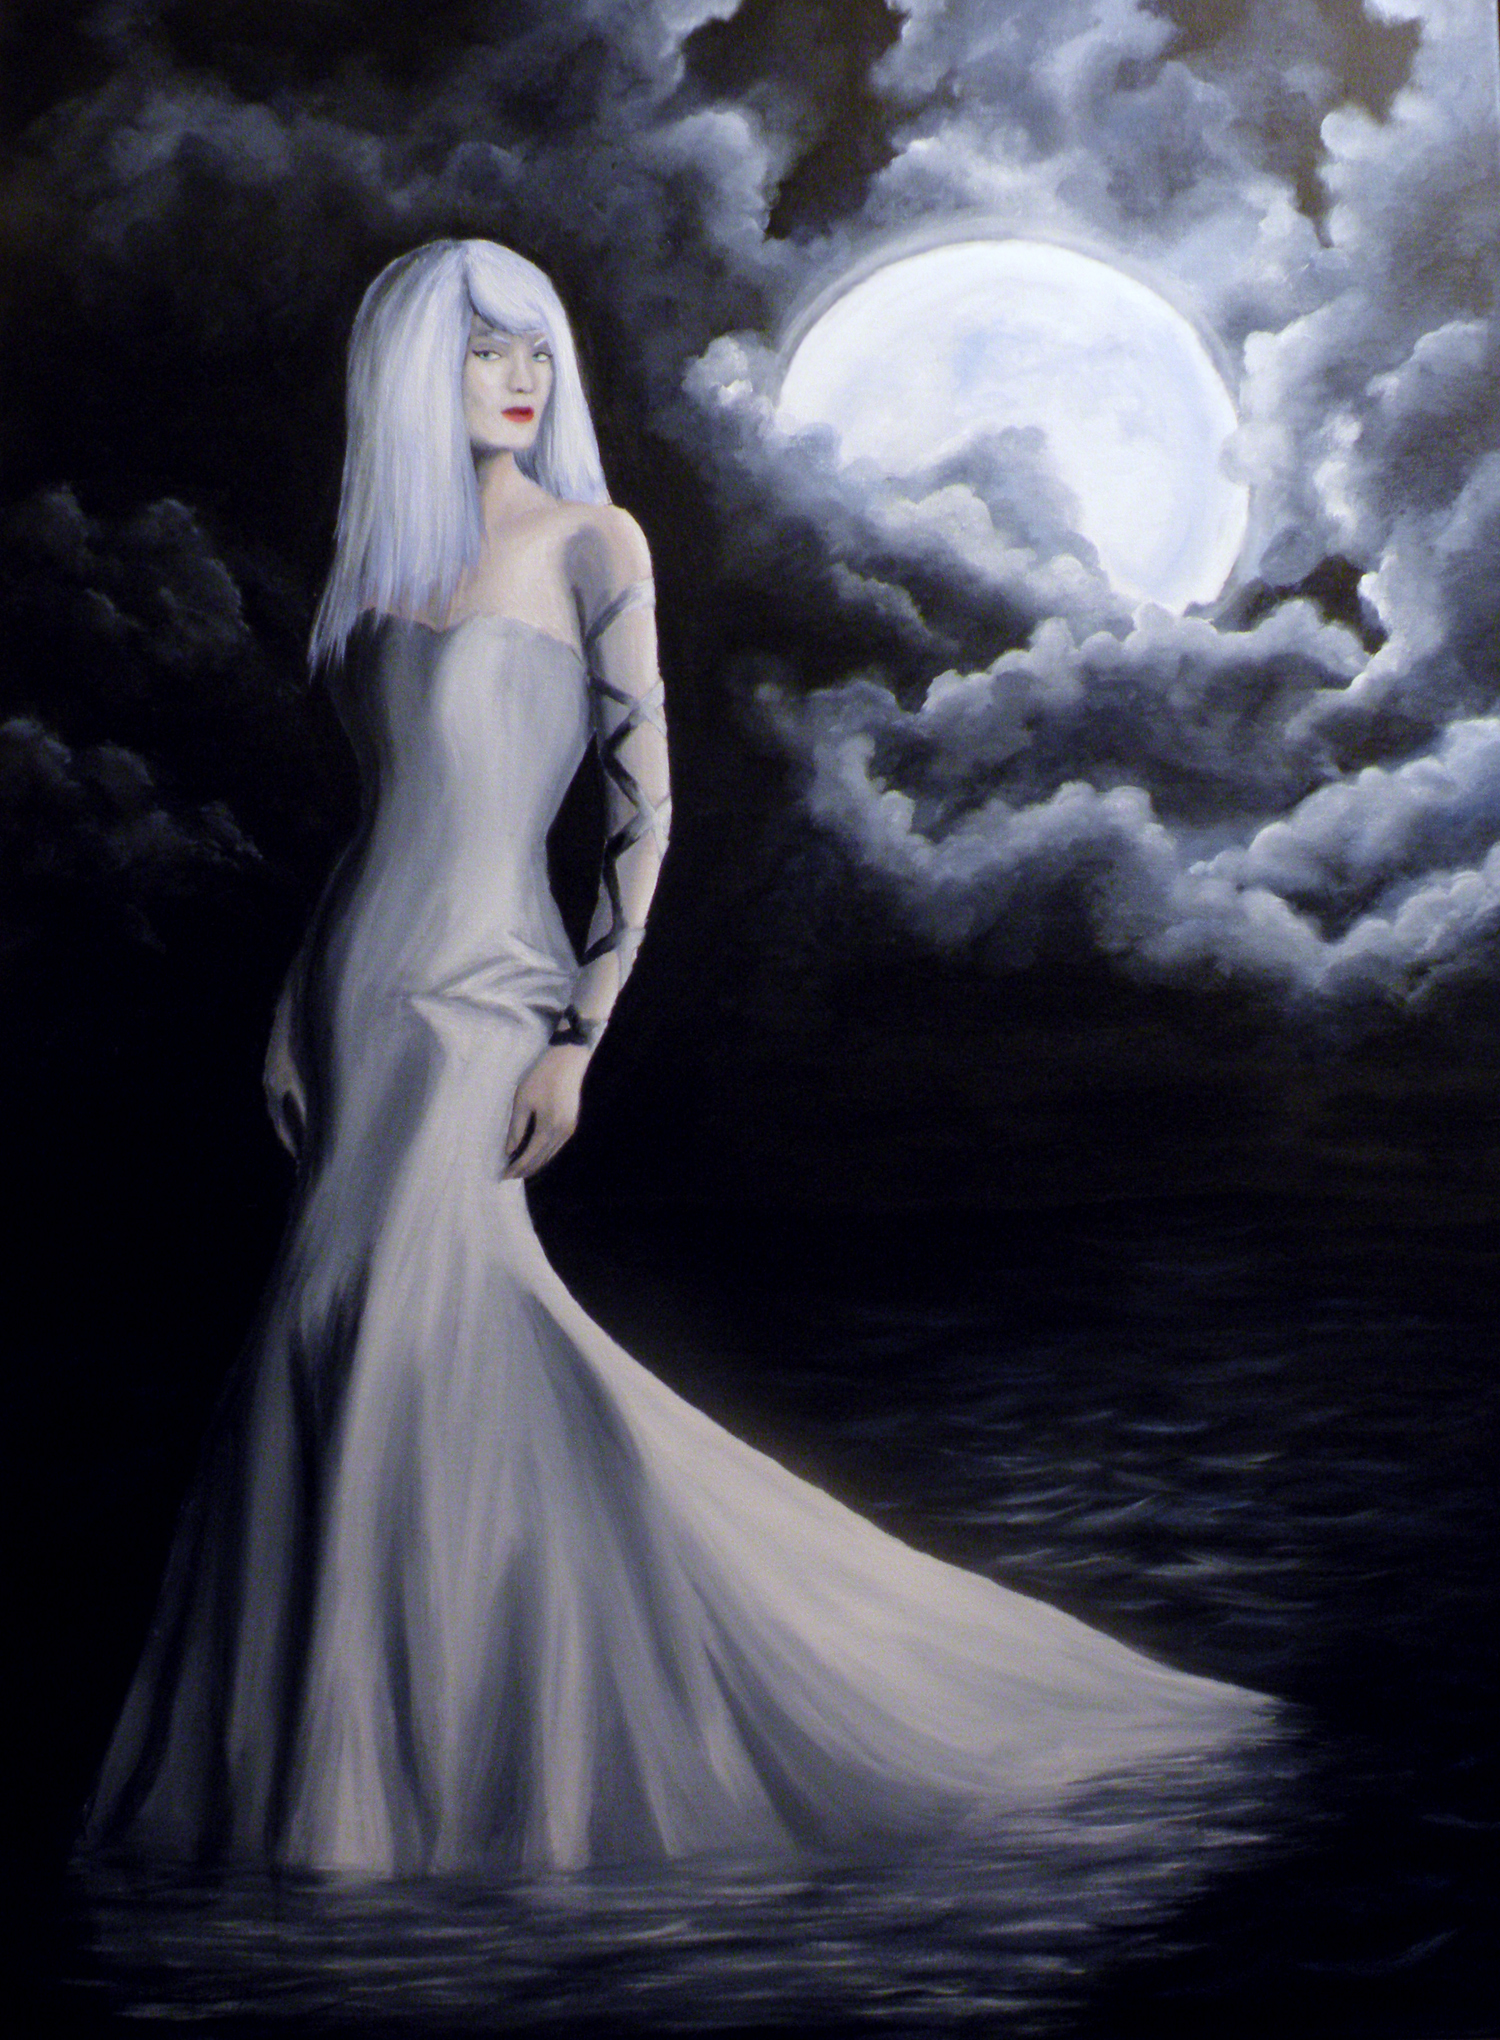 Lady Of The Moon